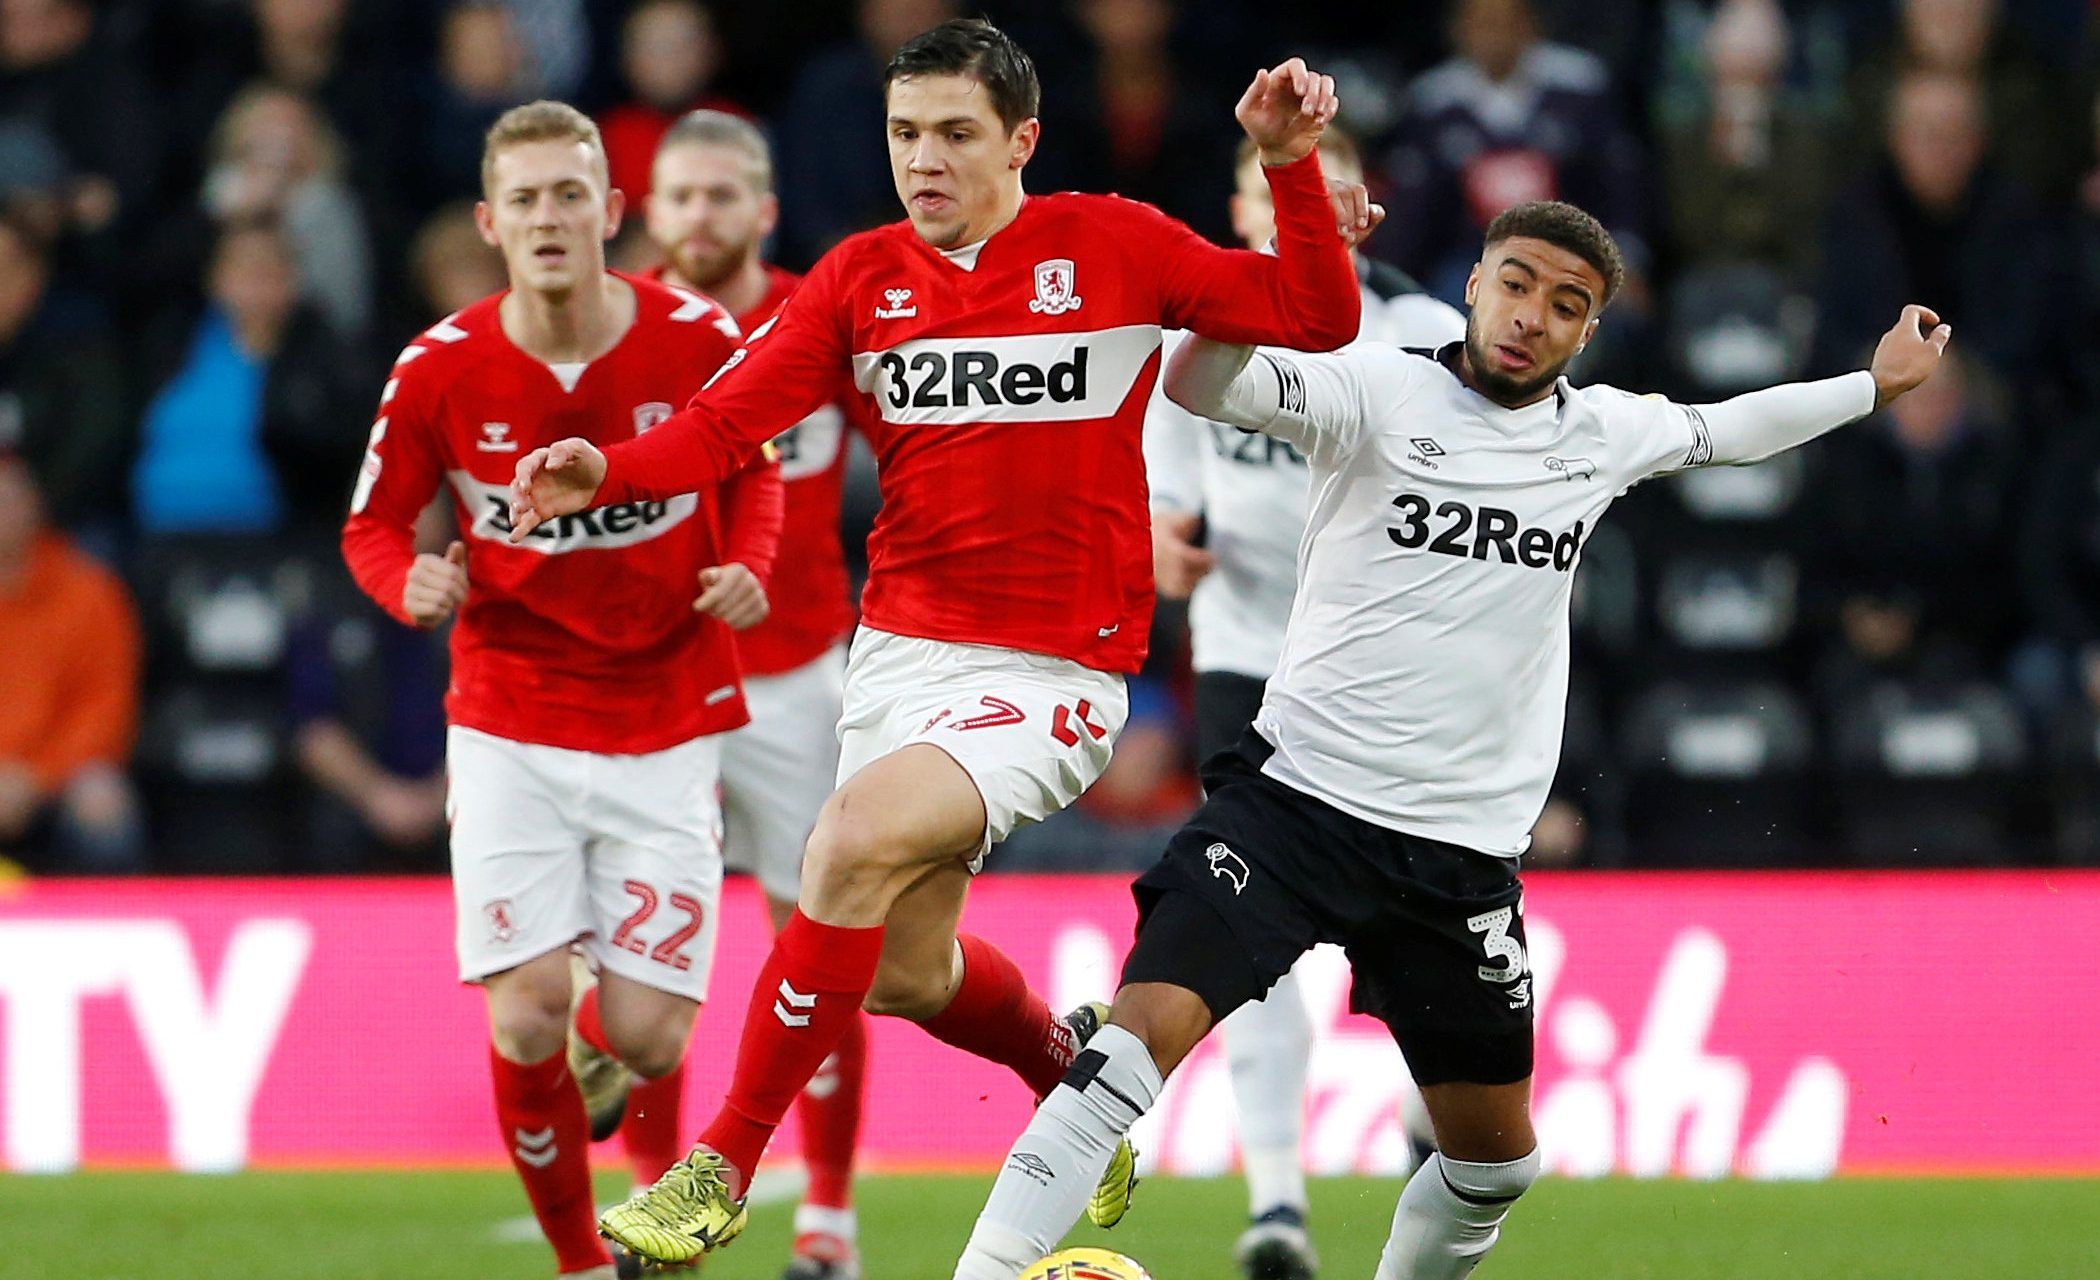 Soccer Football - Championship - Derby County v Middlesbrough - Pride Park, Derby, Britain - January 1, 2019   Middlesbrough's Muhamed Besic in action with Derby County's Jayden Bogle   Action Images/Craig Brough    EDITORIAL USE ONLY. No use with unauthorized audio, video, data, fixture lists, club/league logos or 